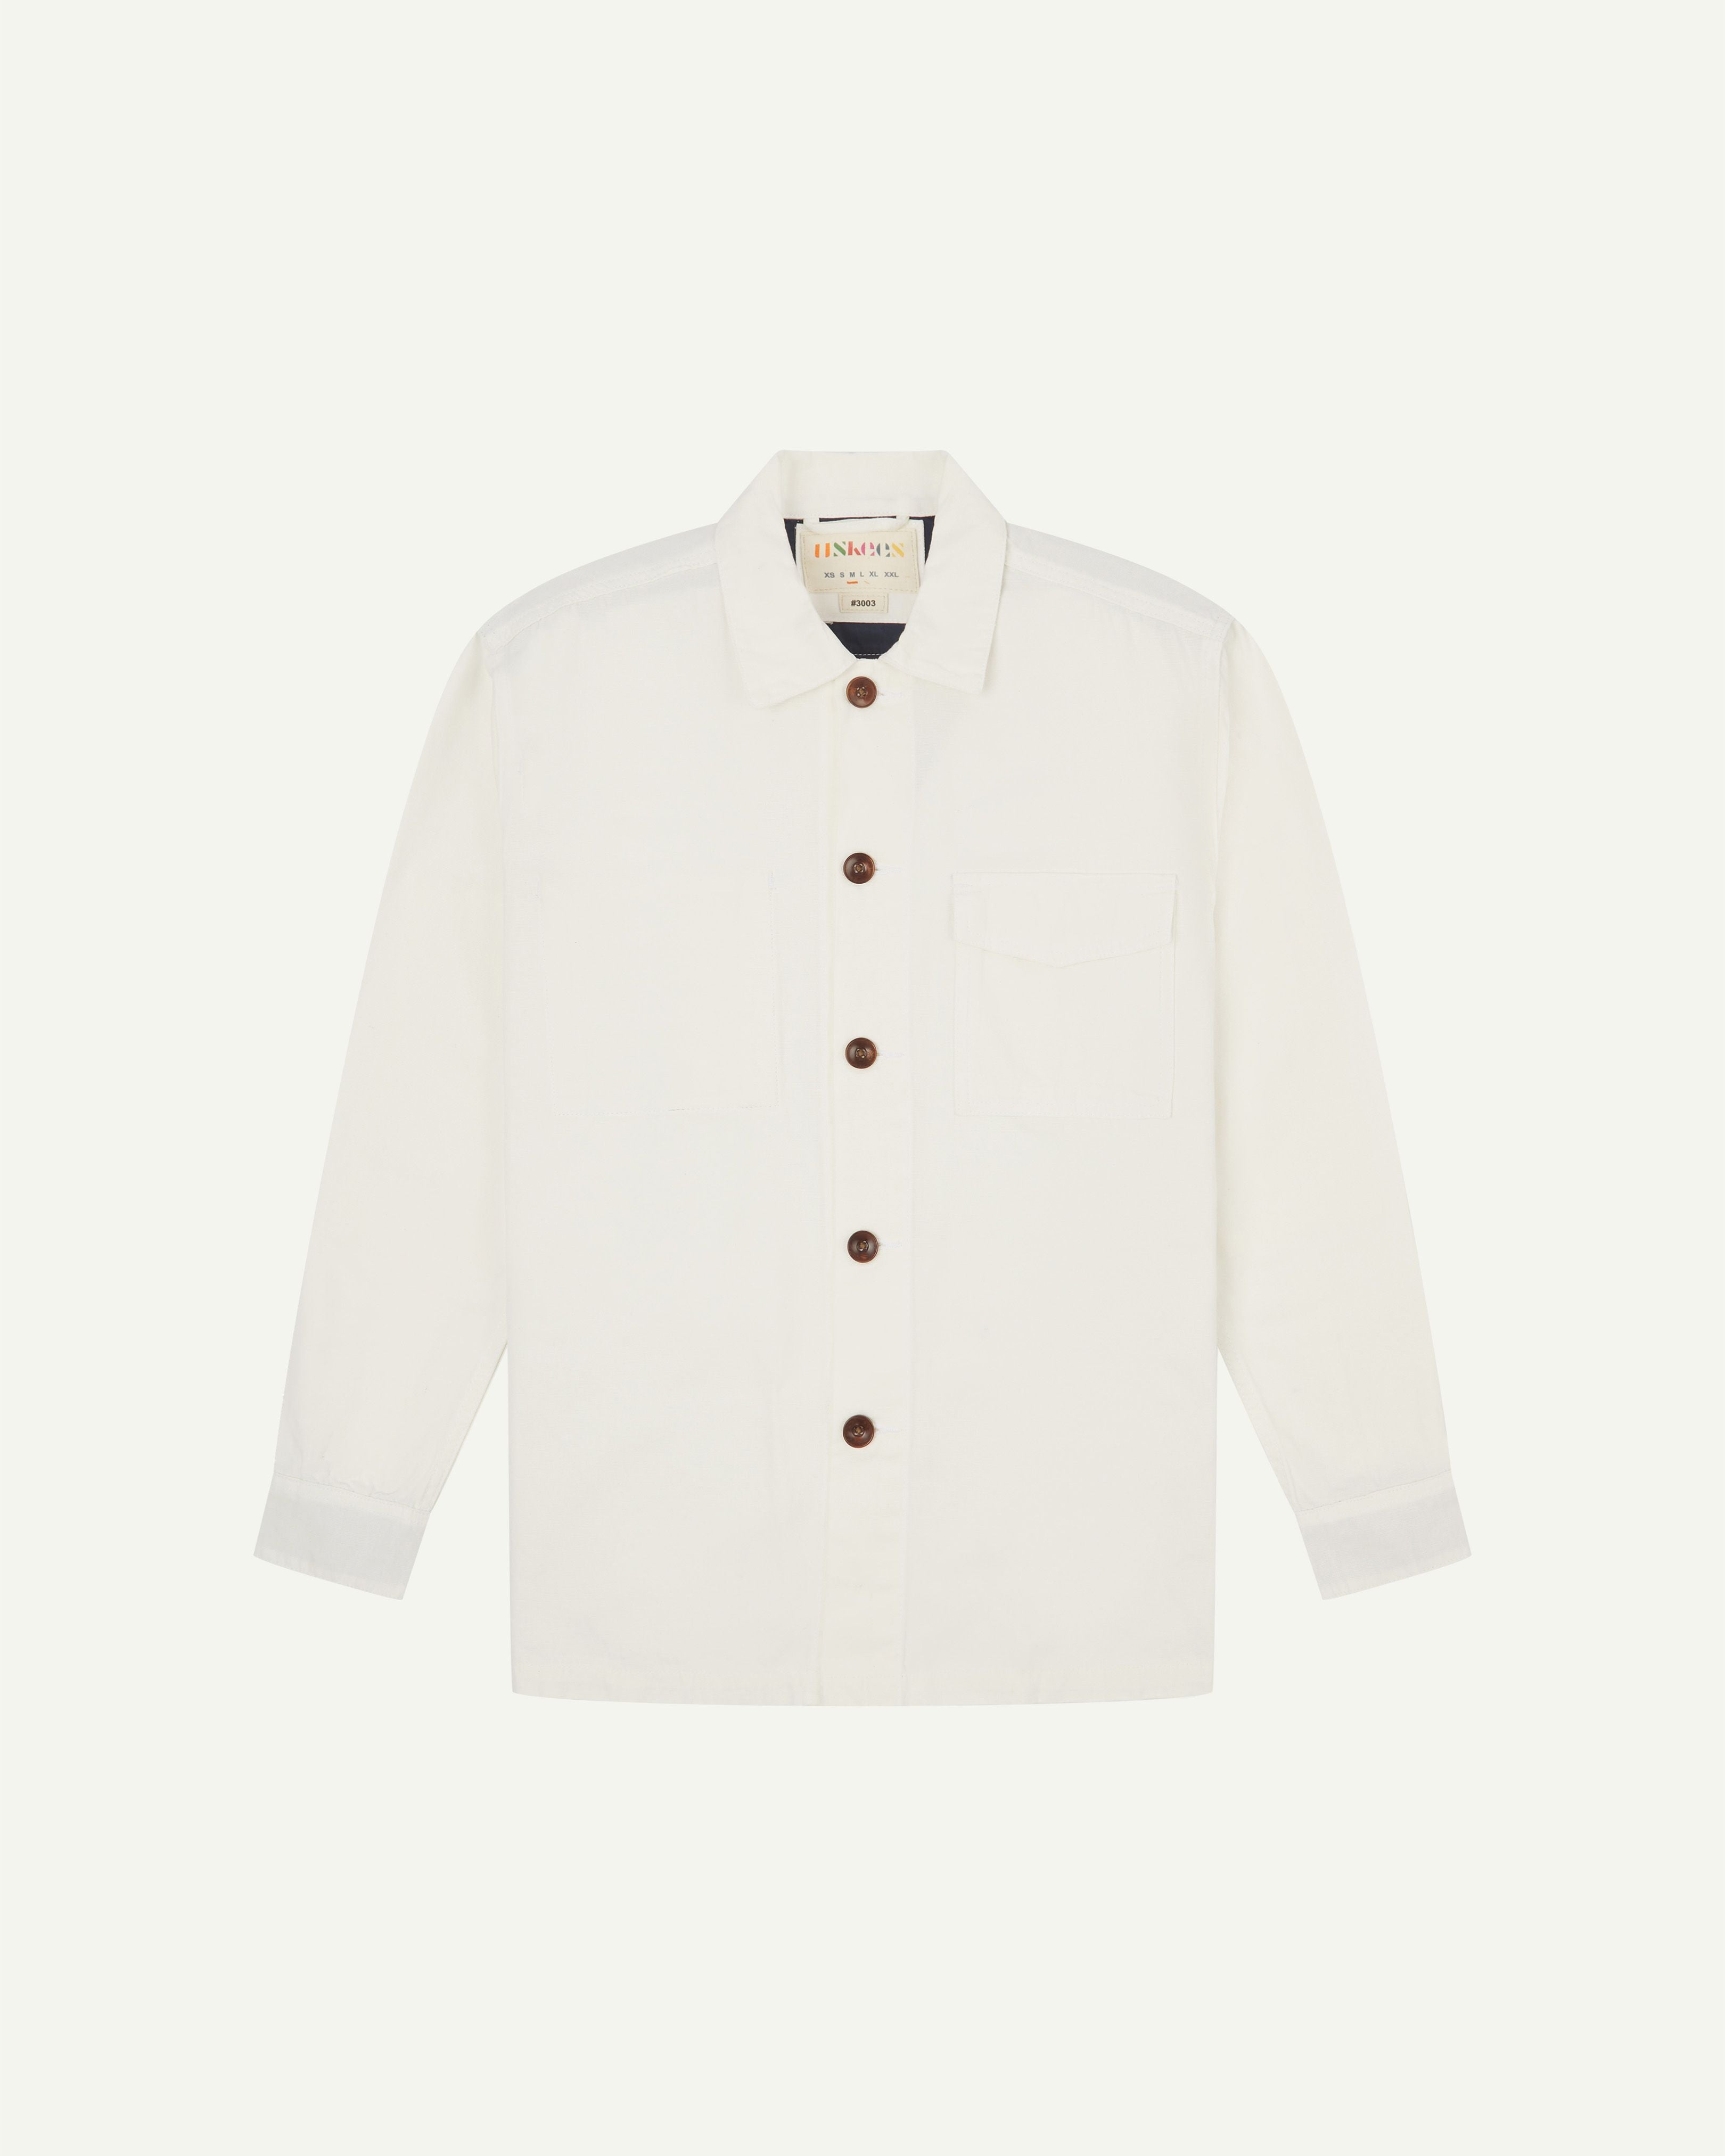 Front flat view of cream buttoned 3003 workshirt from Uskees. Showing breast pocket, navy yoke lining and brown corozo buttons